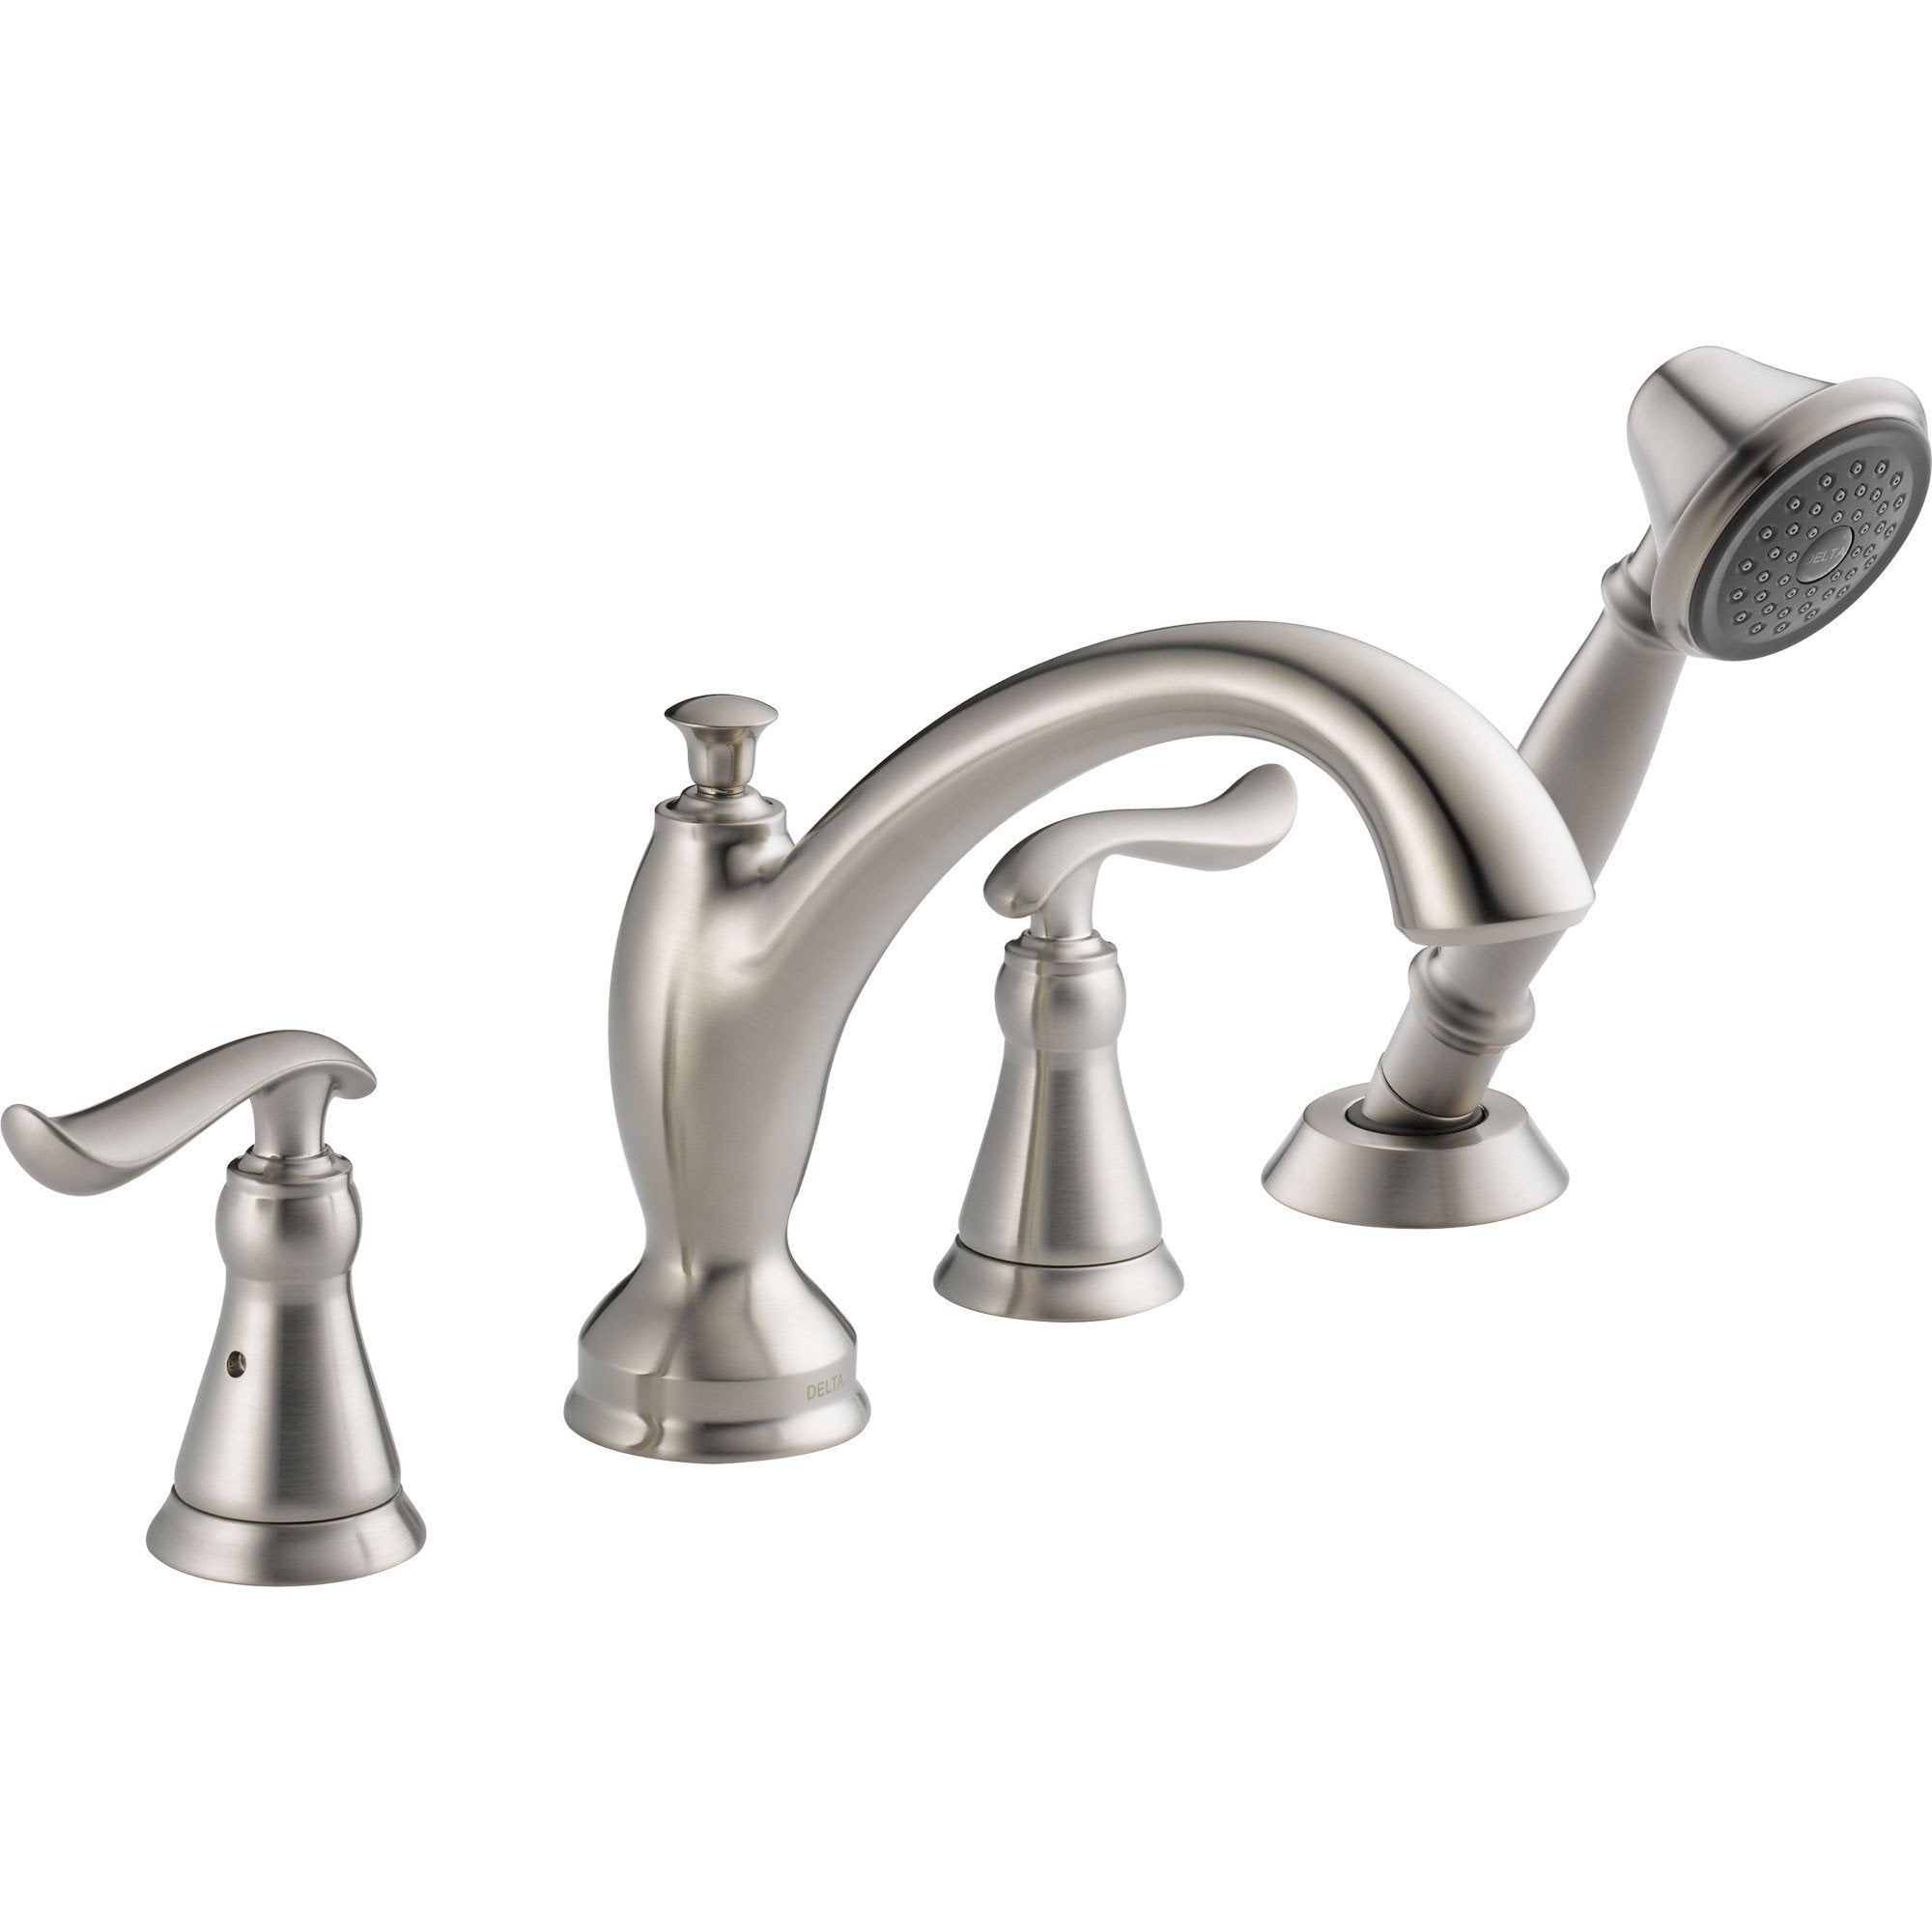 Delta Linden Stainless Steel Finish Roman Tub Faucet with Handspray Trim 555631